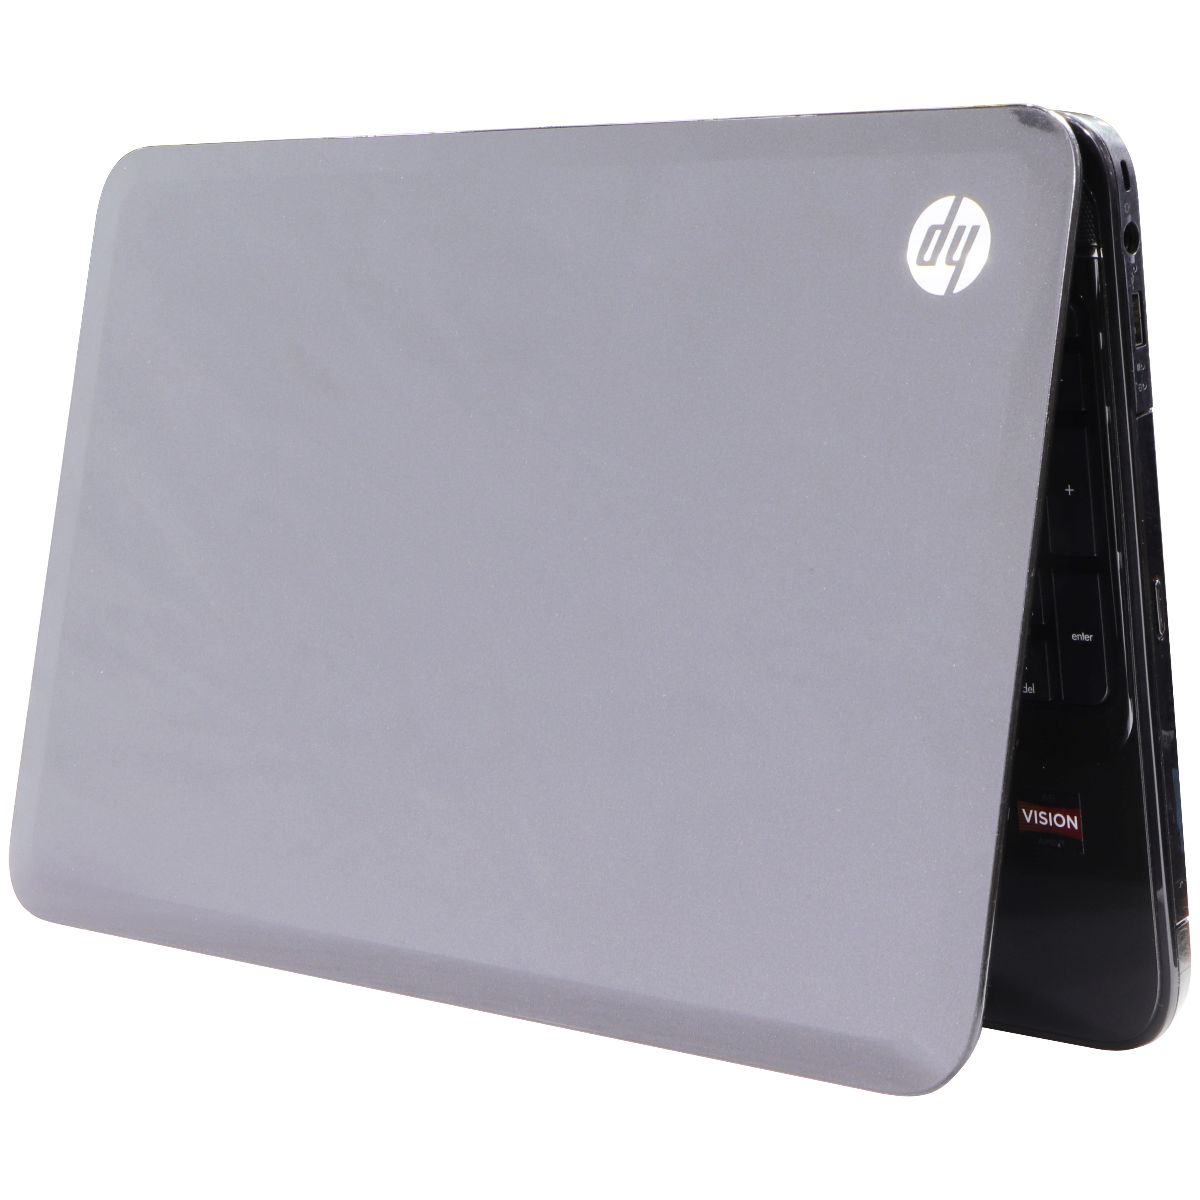 HP Pavilion G6 Notebook (15.6-in) (g6-2235us) AMD A64400M 4GB RAM/750 GB HDD Laptops - PC Laptops & Netbooks HP    - Simple Cell Bulk Wholesale Pricing - USA Seller